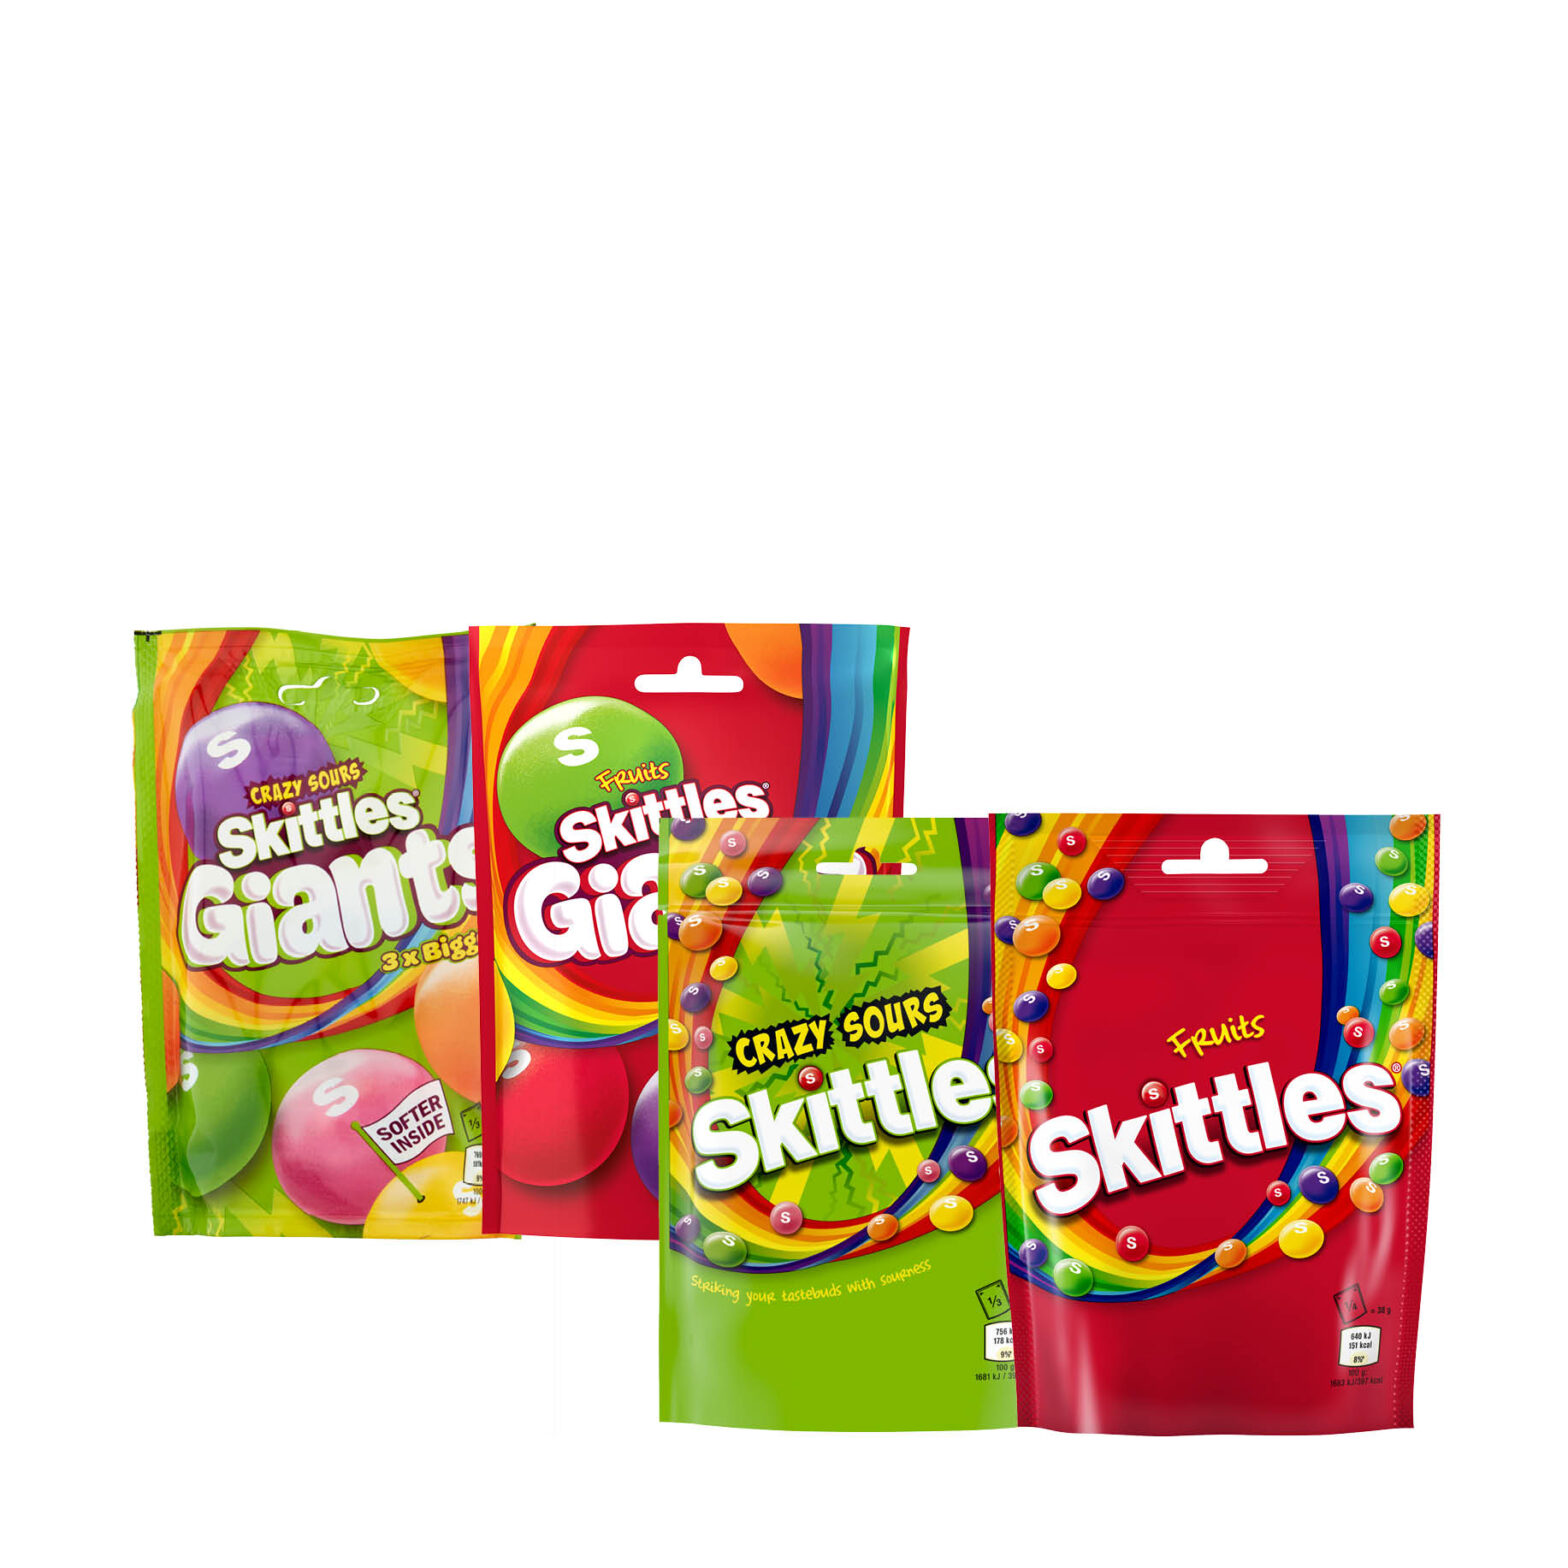 Skittles Crazy Sours Giants Pouch  / Skittles Fruits Giants Pouch  /Skittles Sour Pouch / Skittles Fruits Pouch